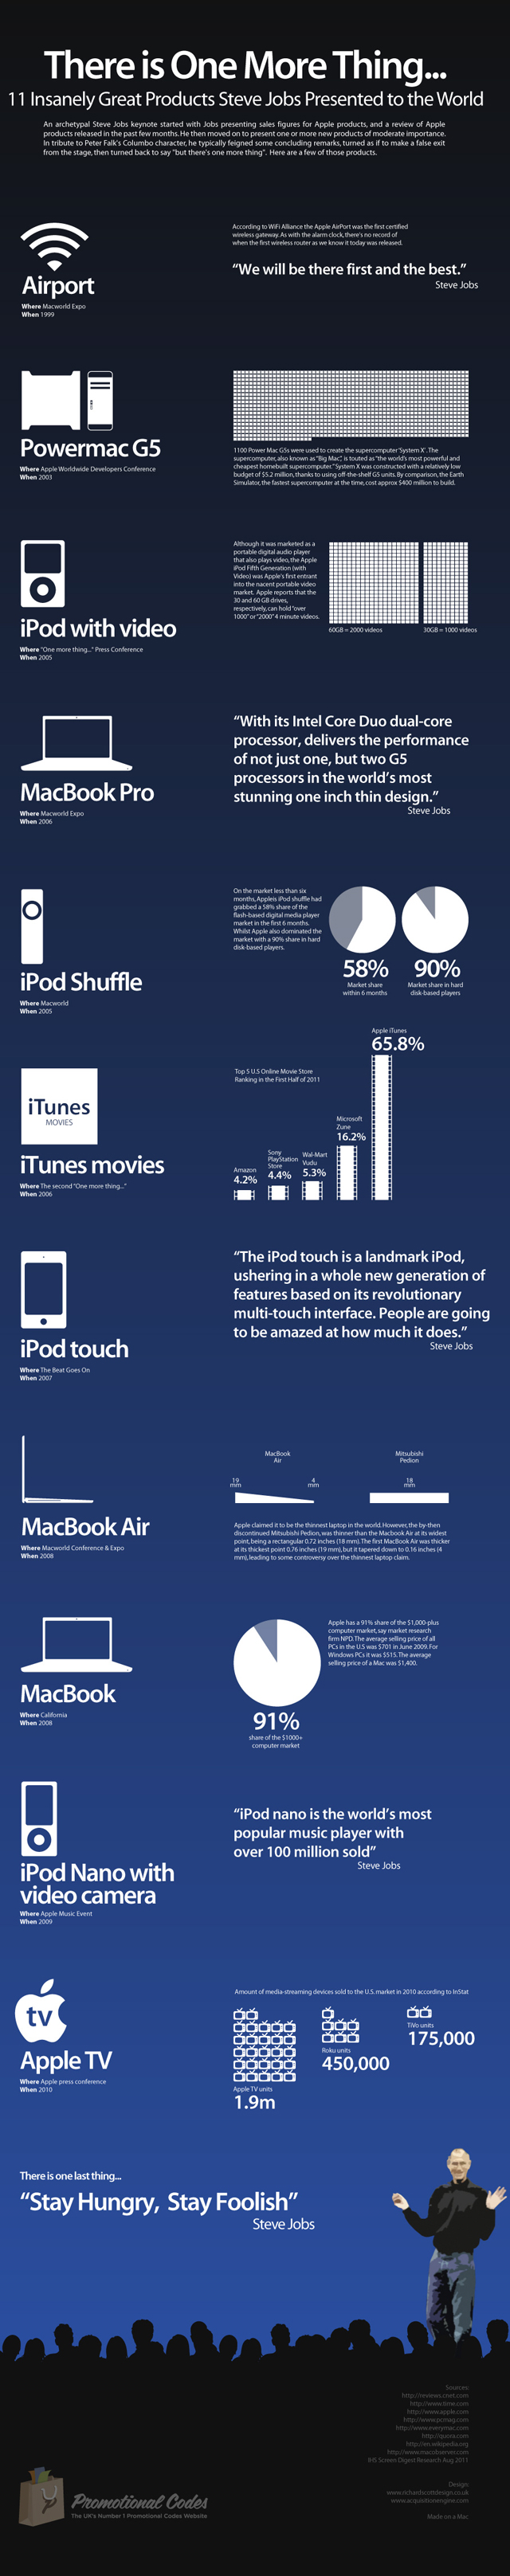 Infográfico sobre Steve Jobs - One more thing…